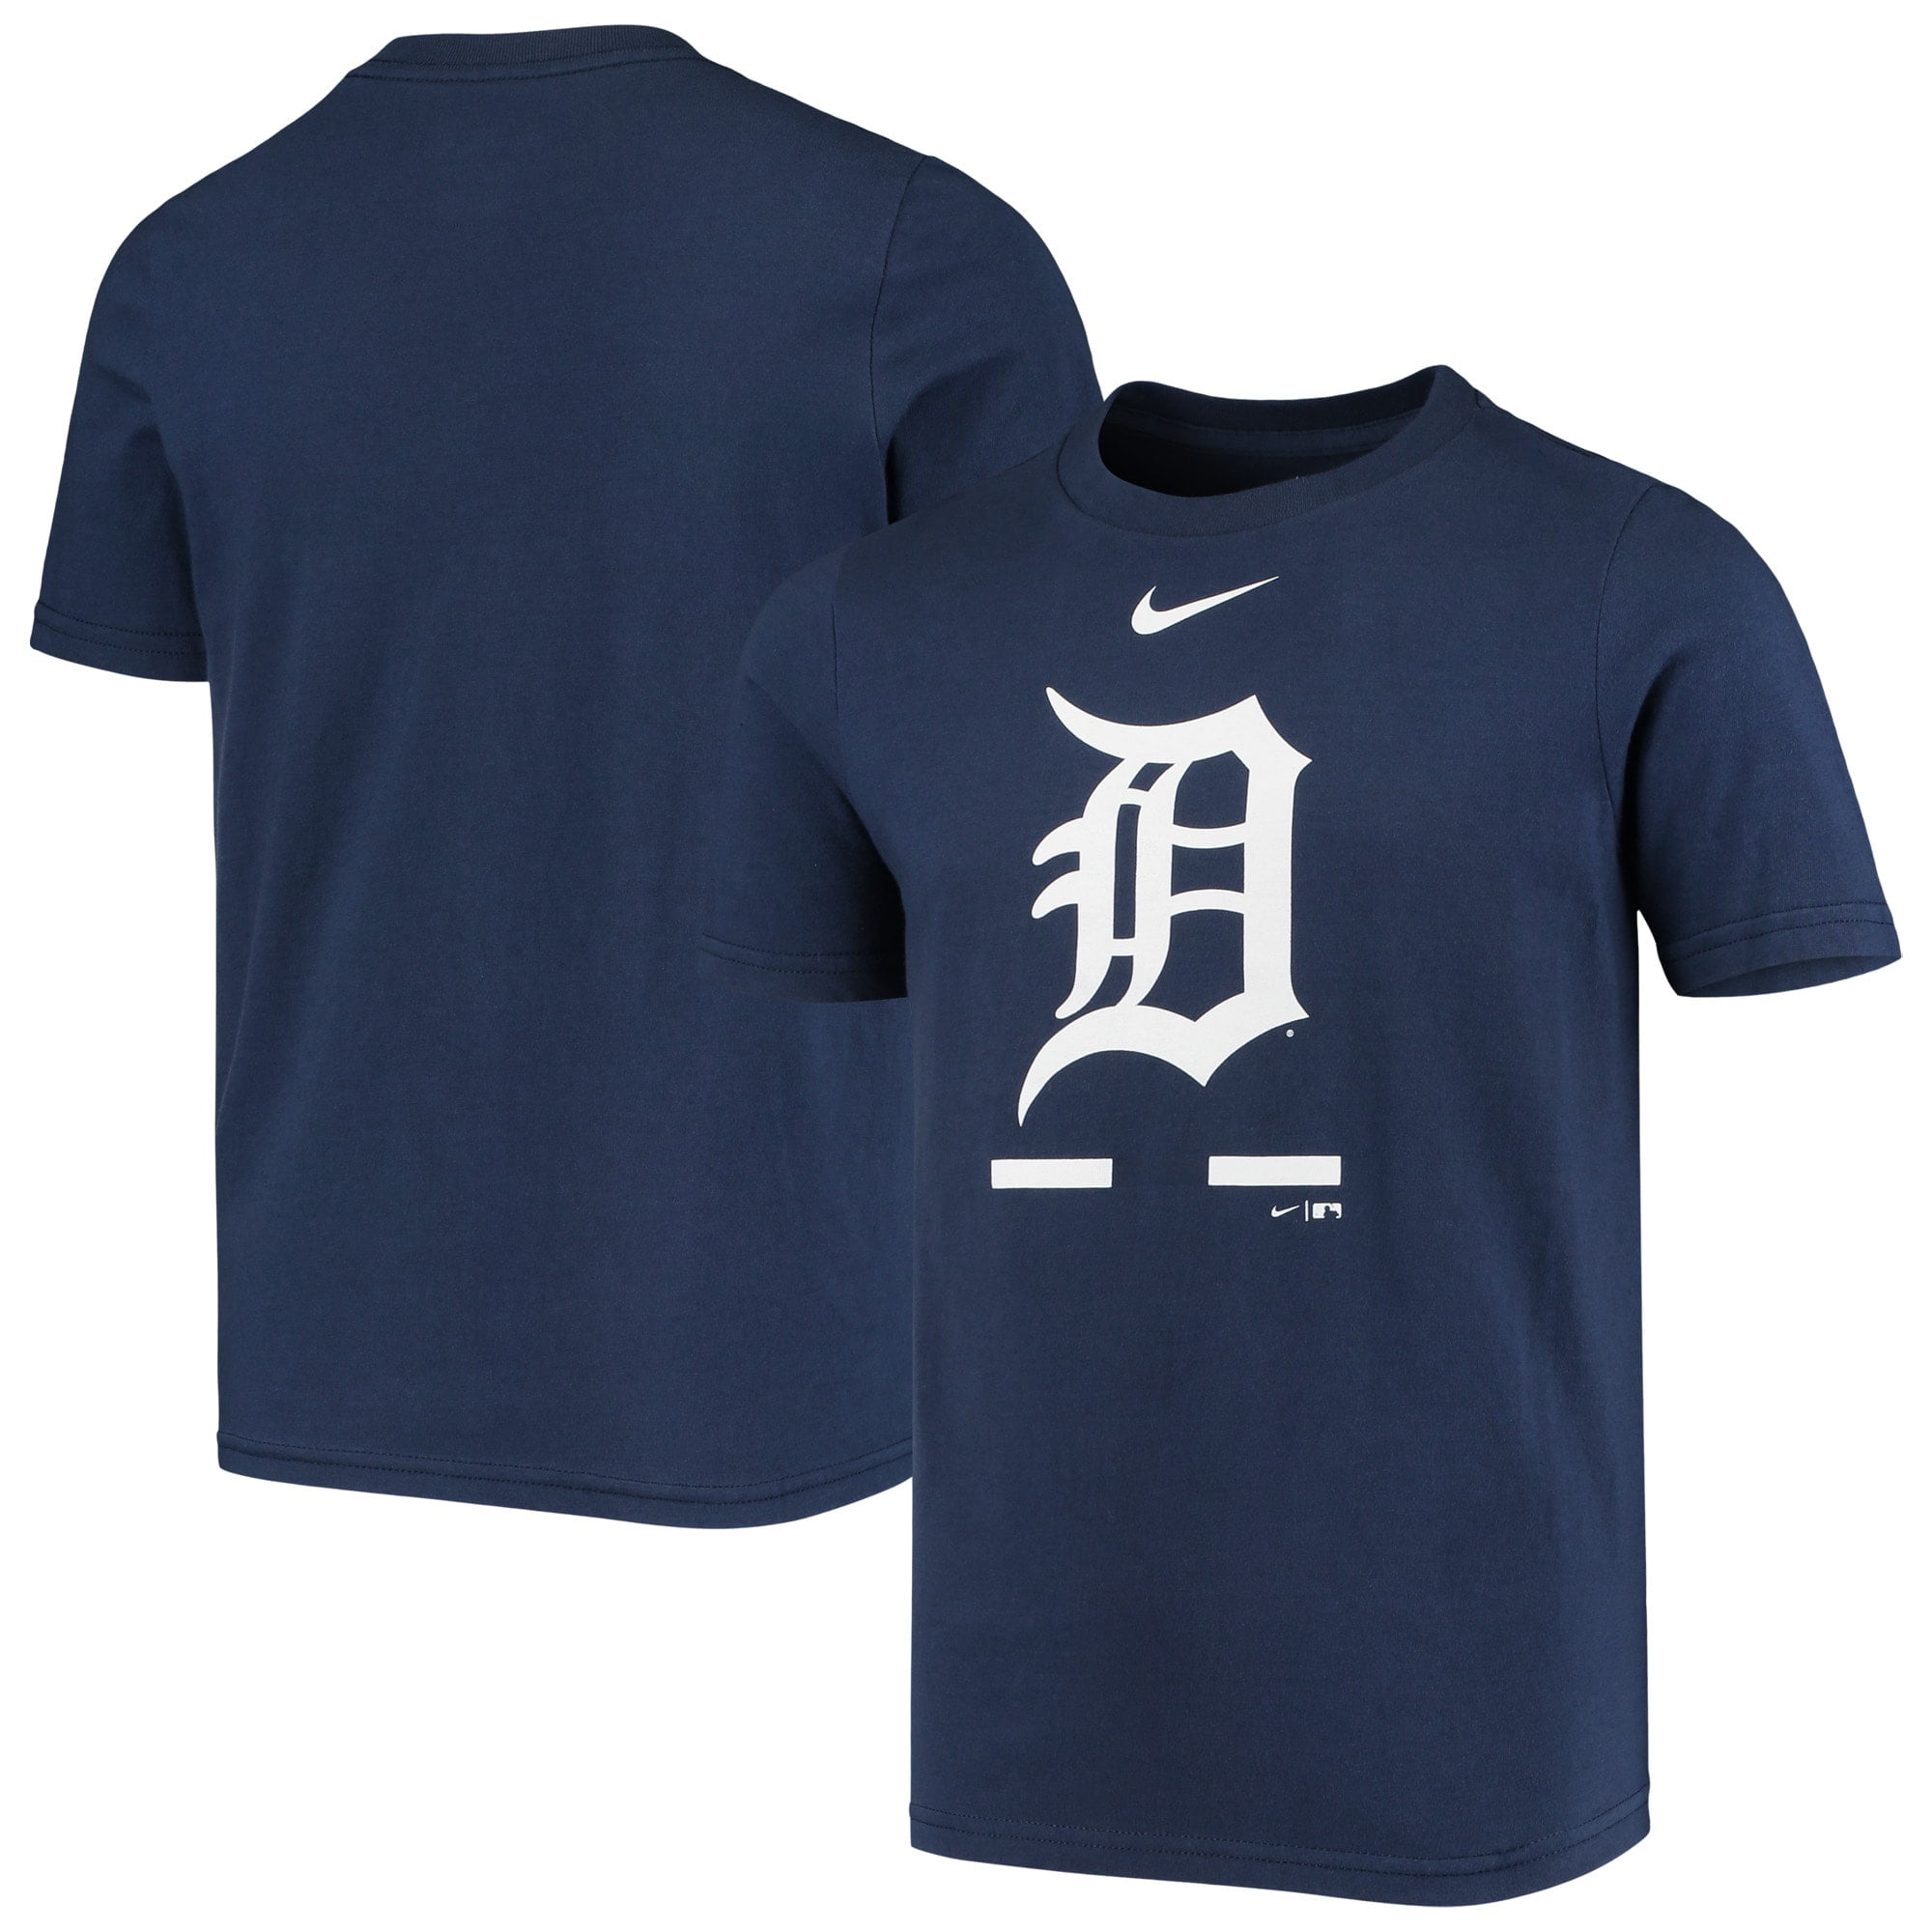 detroit tigers kids jersey,Save up to 19%,www.ilcascinone.com